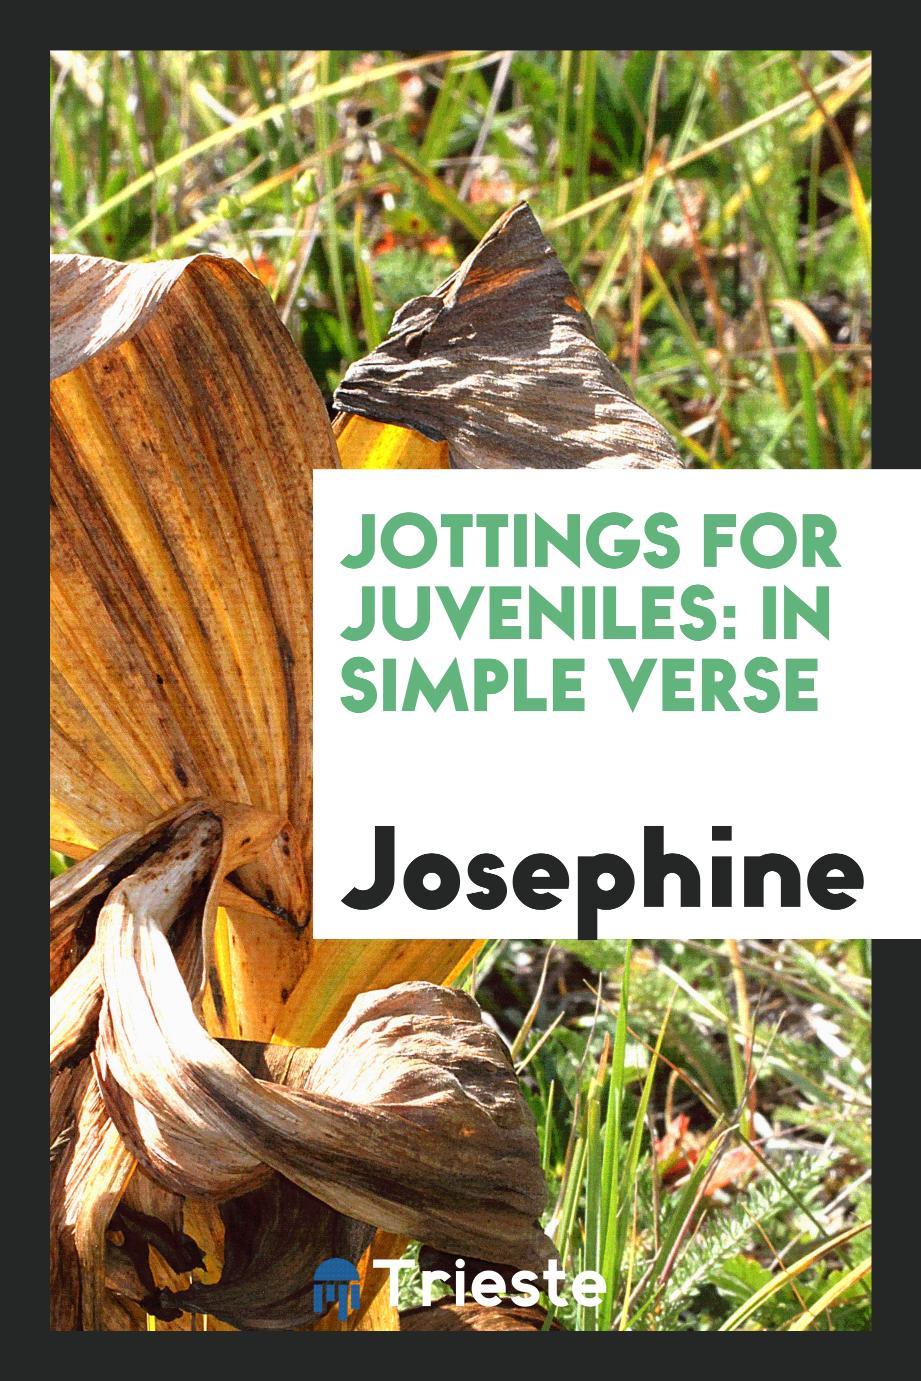 Jottings for Juveniles: In Simple Verse